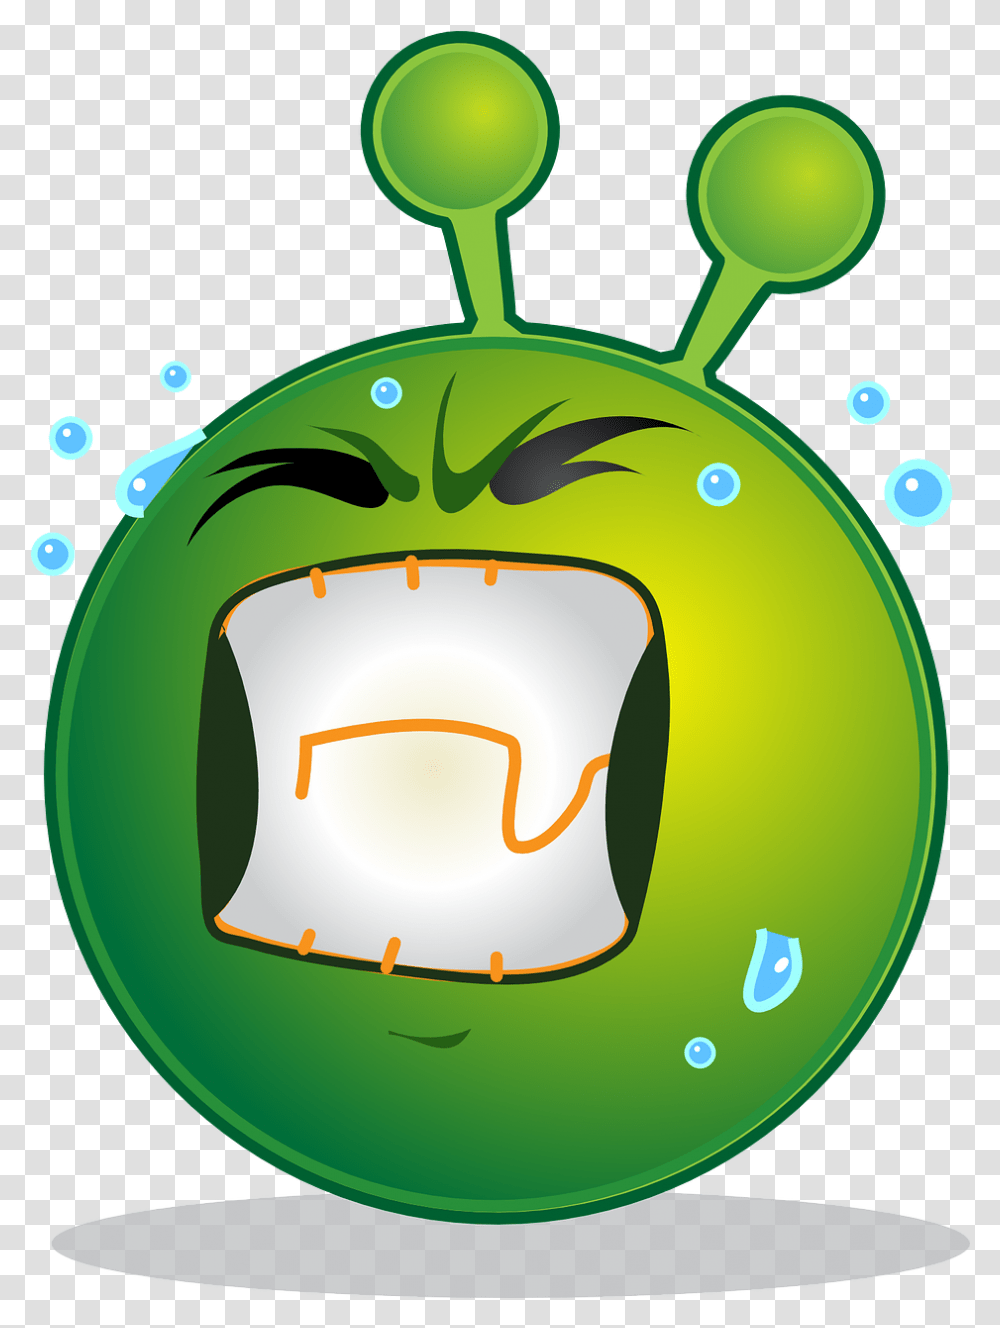 Alien Smiley Emoji Angry Alien, Green, Plant, Graphics, Art Transparent Png